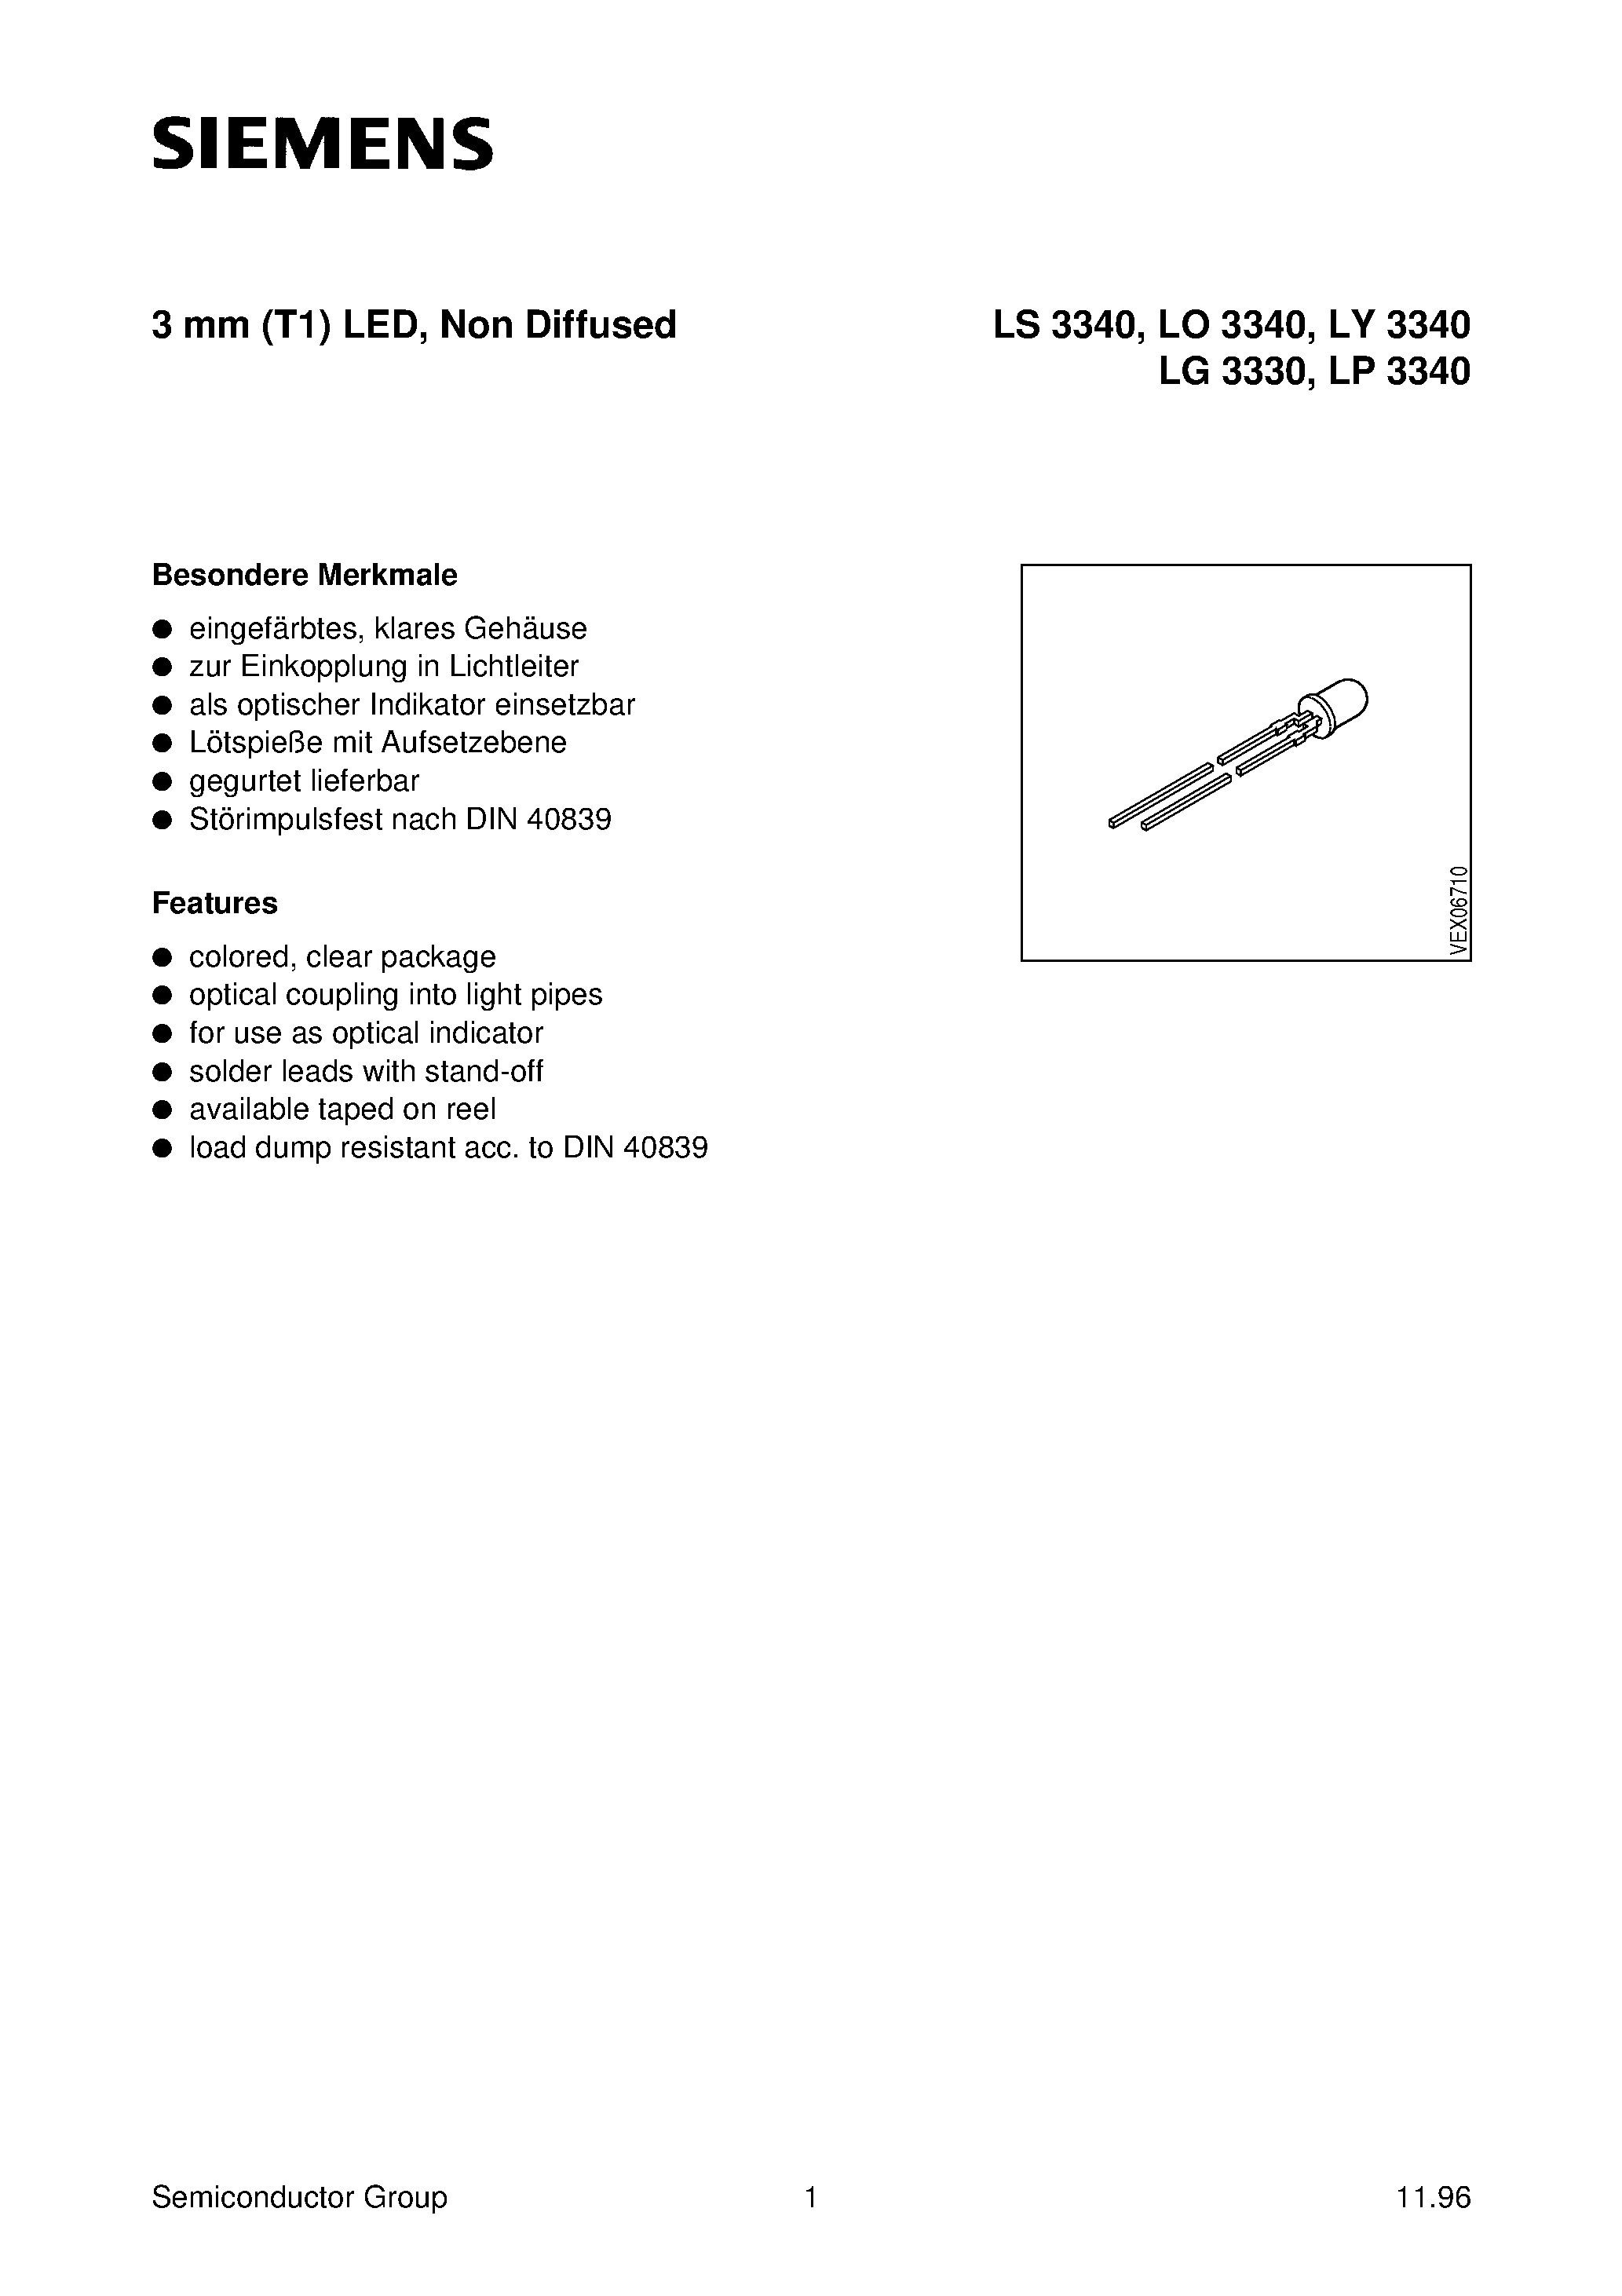 Datasheet LS3340-N - 3 mm (T1) LED / Non Diffused page 1